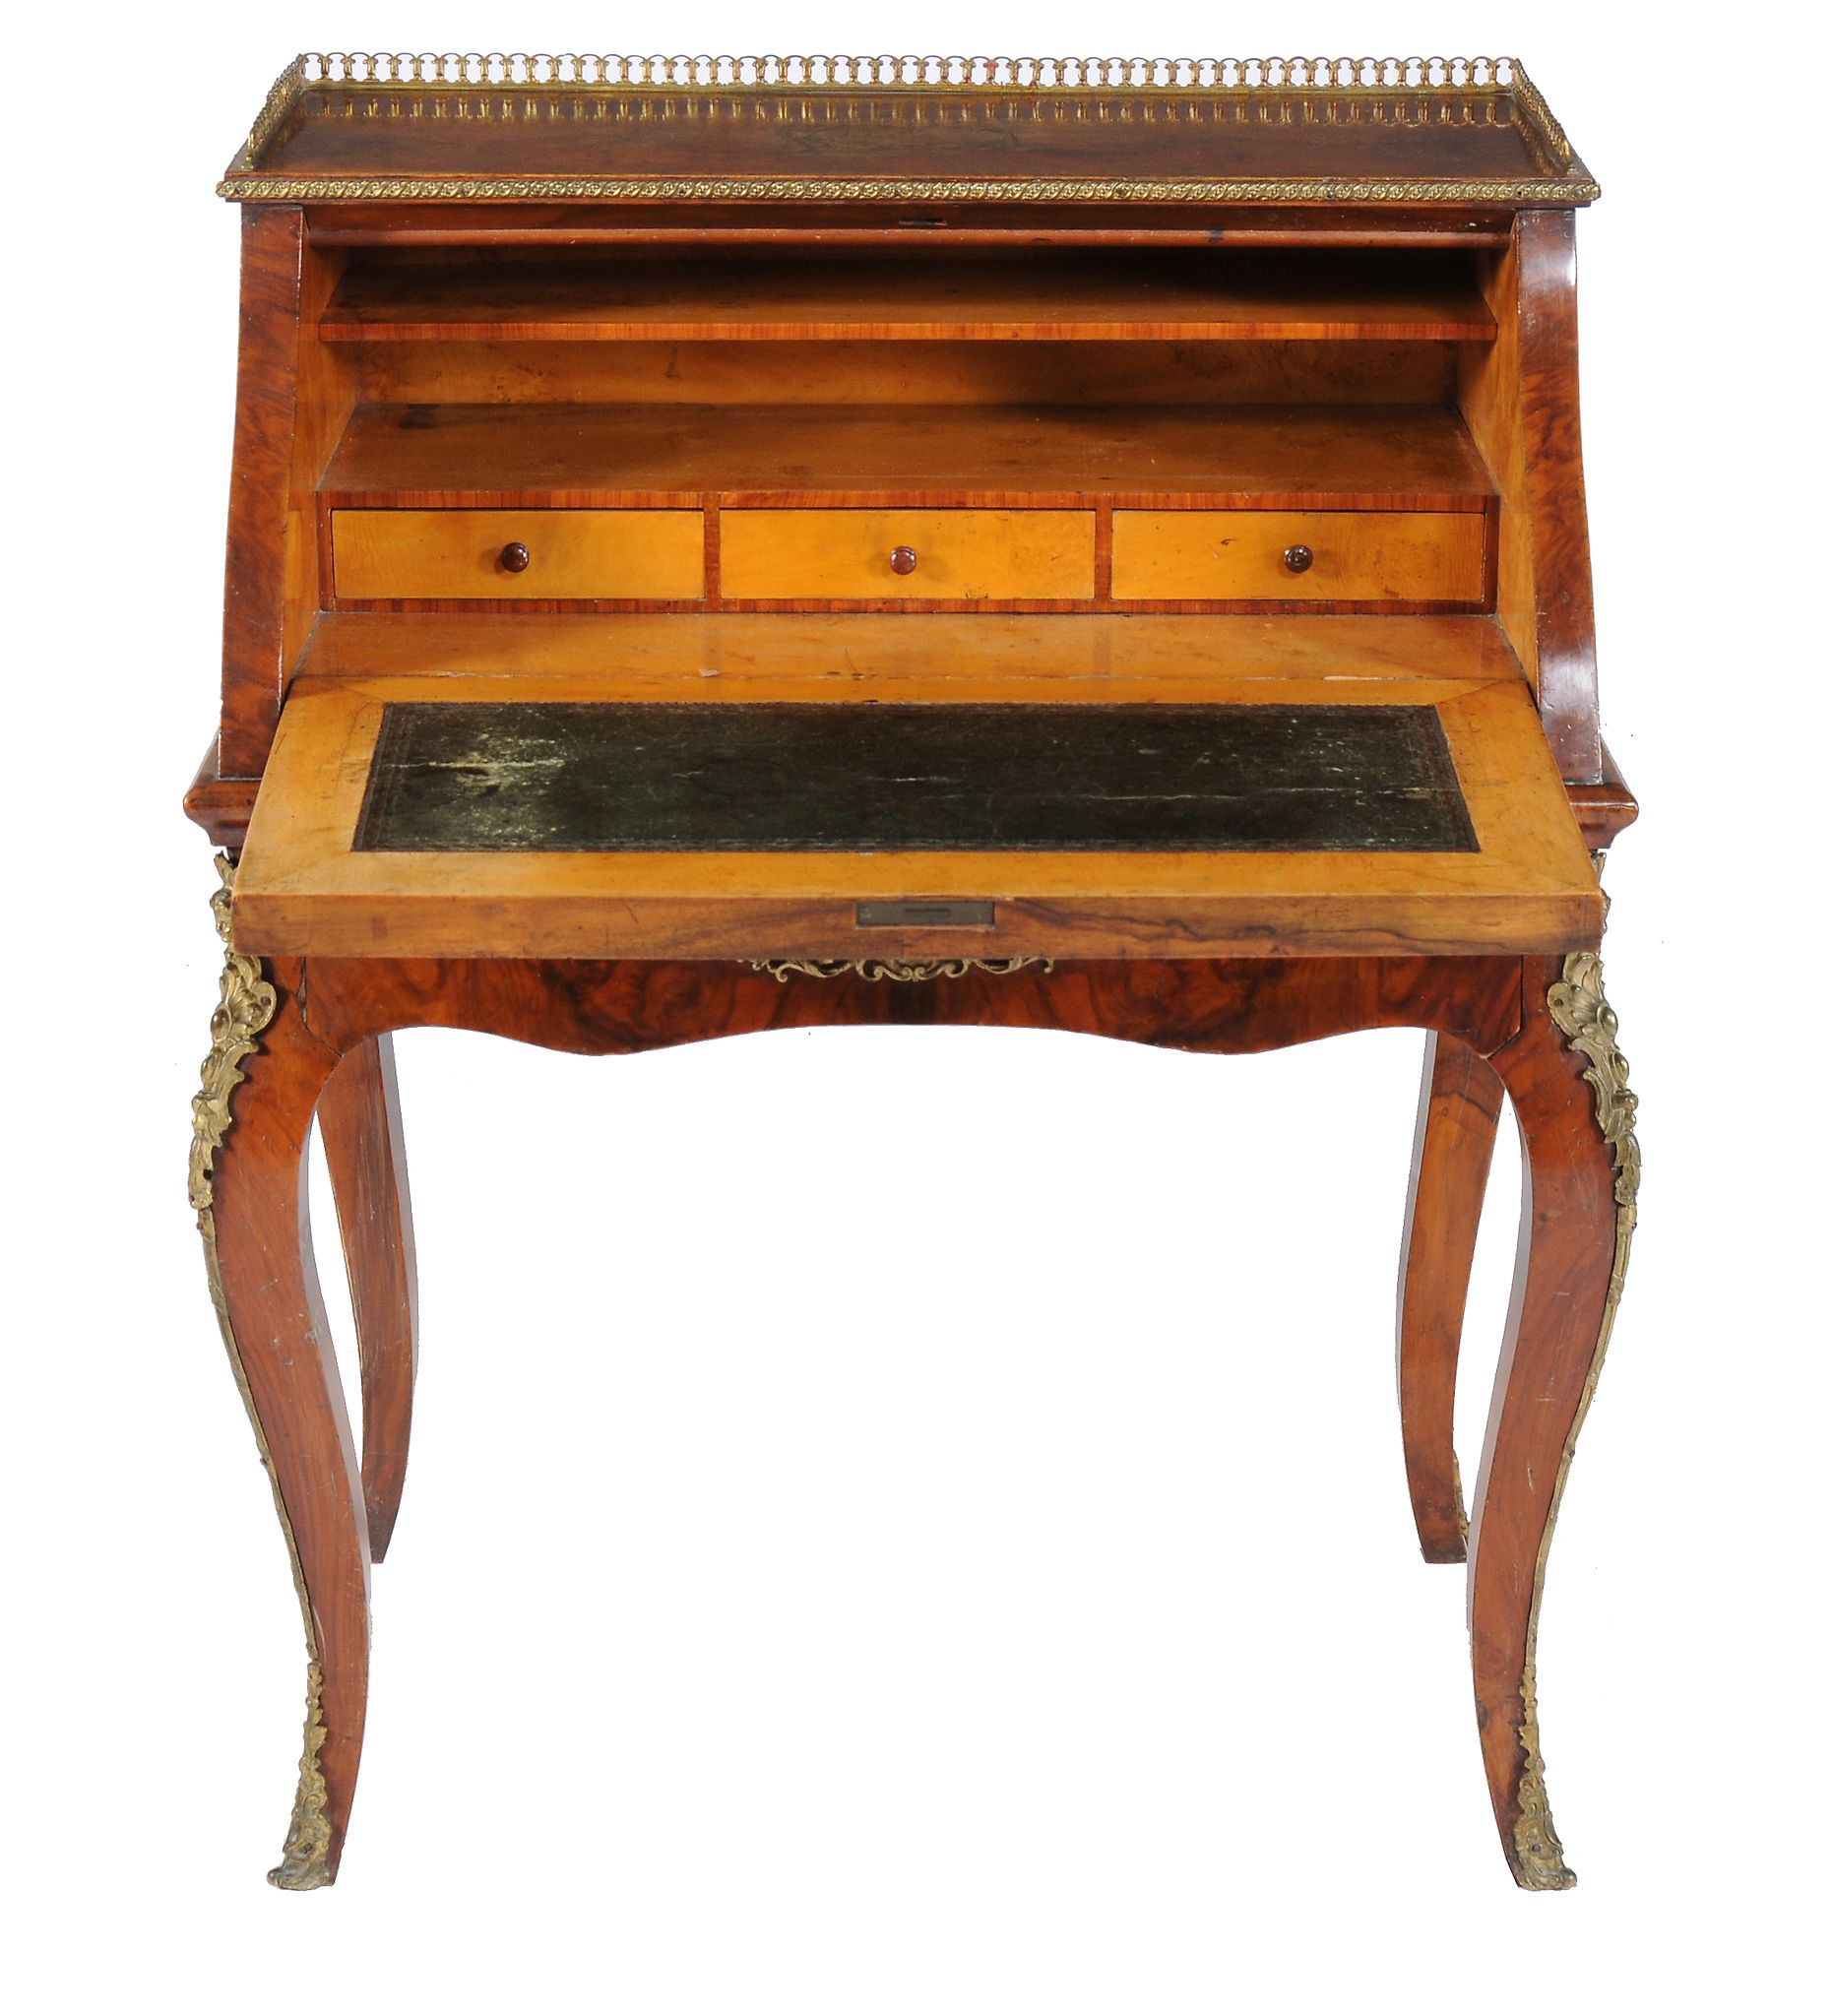 A French figured and burr walnut bureau de dame, in Louis XVI style, second half 19th century, - Image 2 of 3